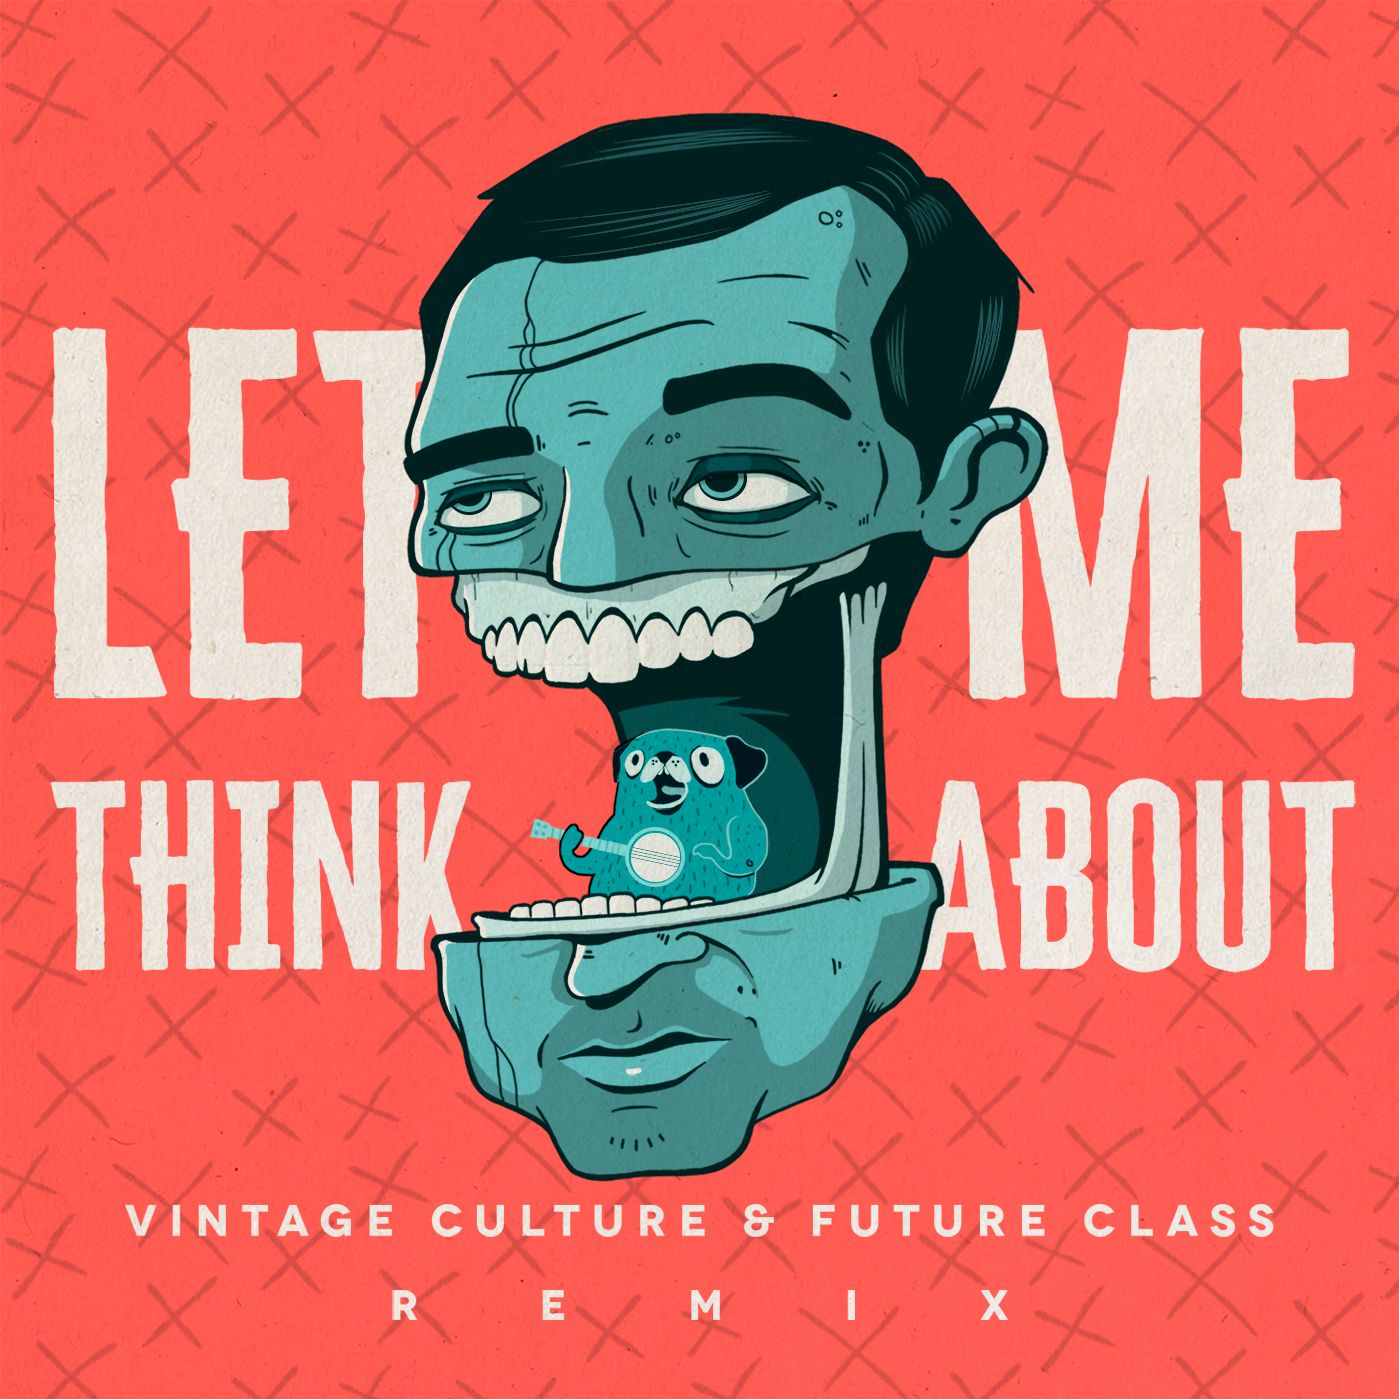 Ladda ner Vintage Culture & Future Class - Let Me Think About